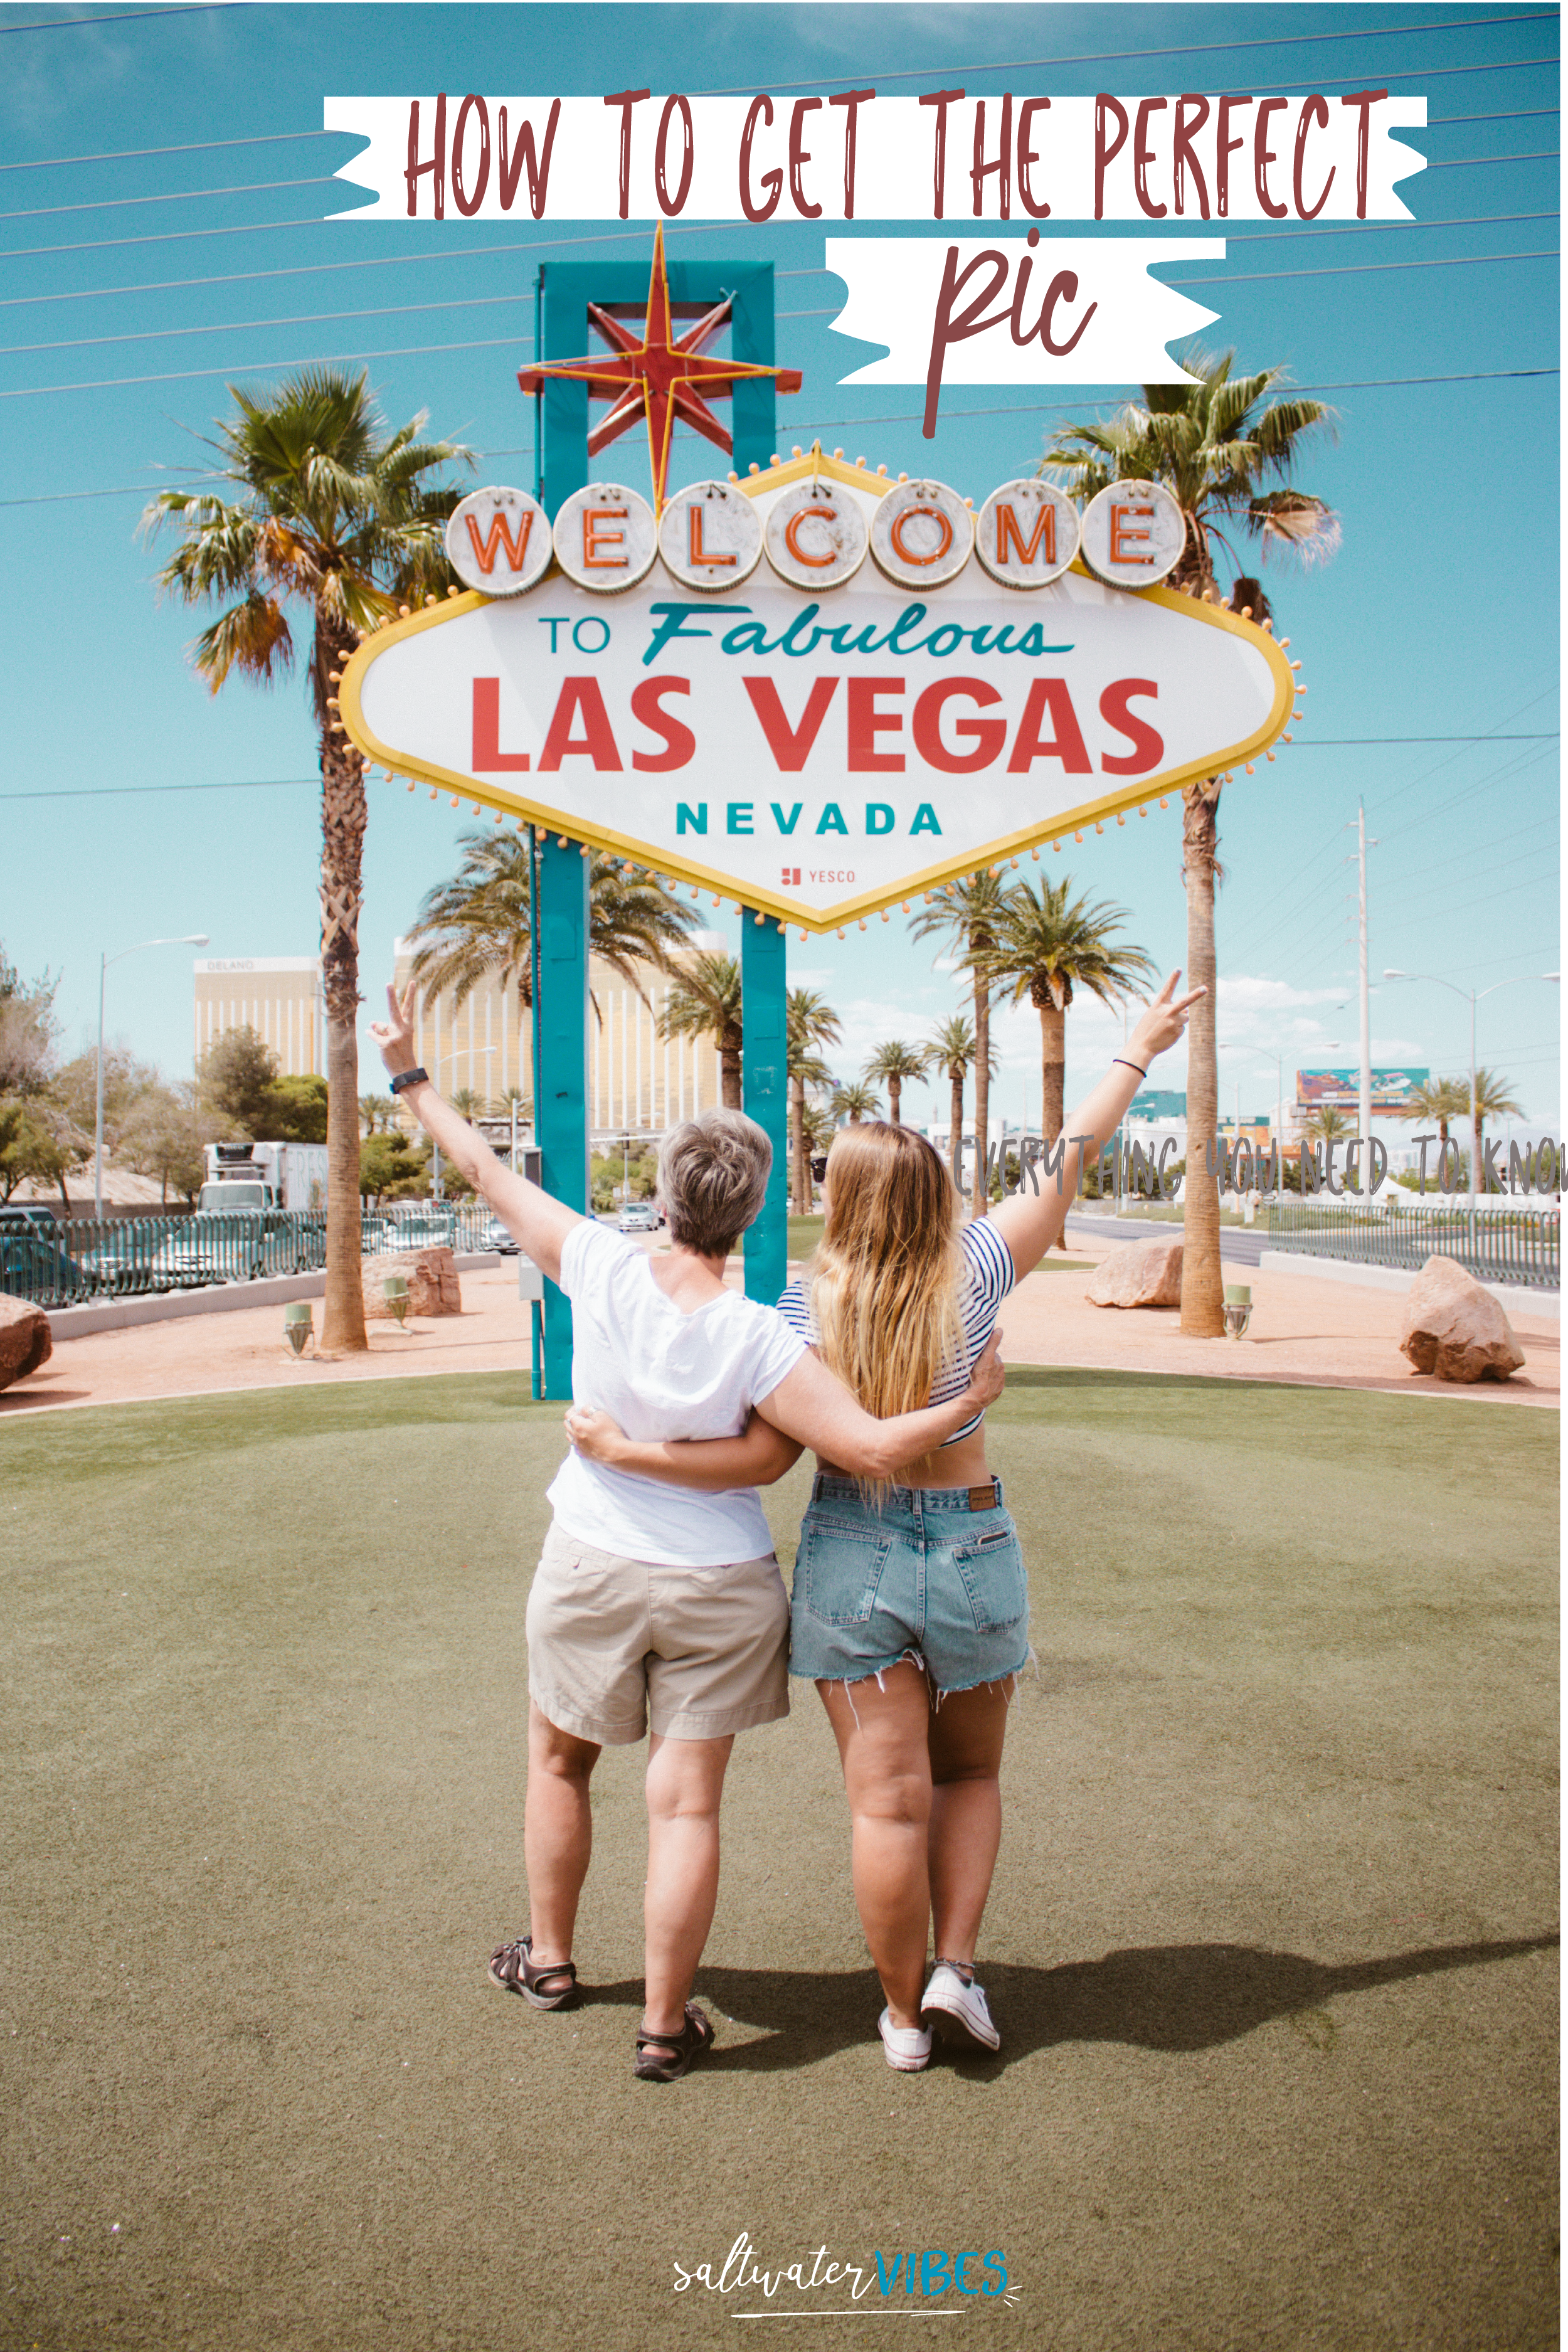 How To Get The Perfect Picture At The Las Vegas Sign | SaltWaterVibes